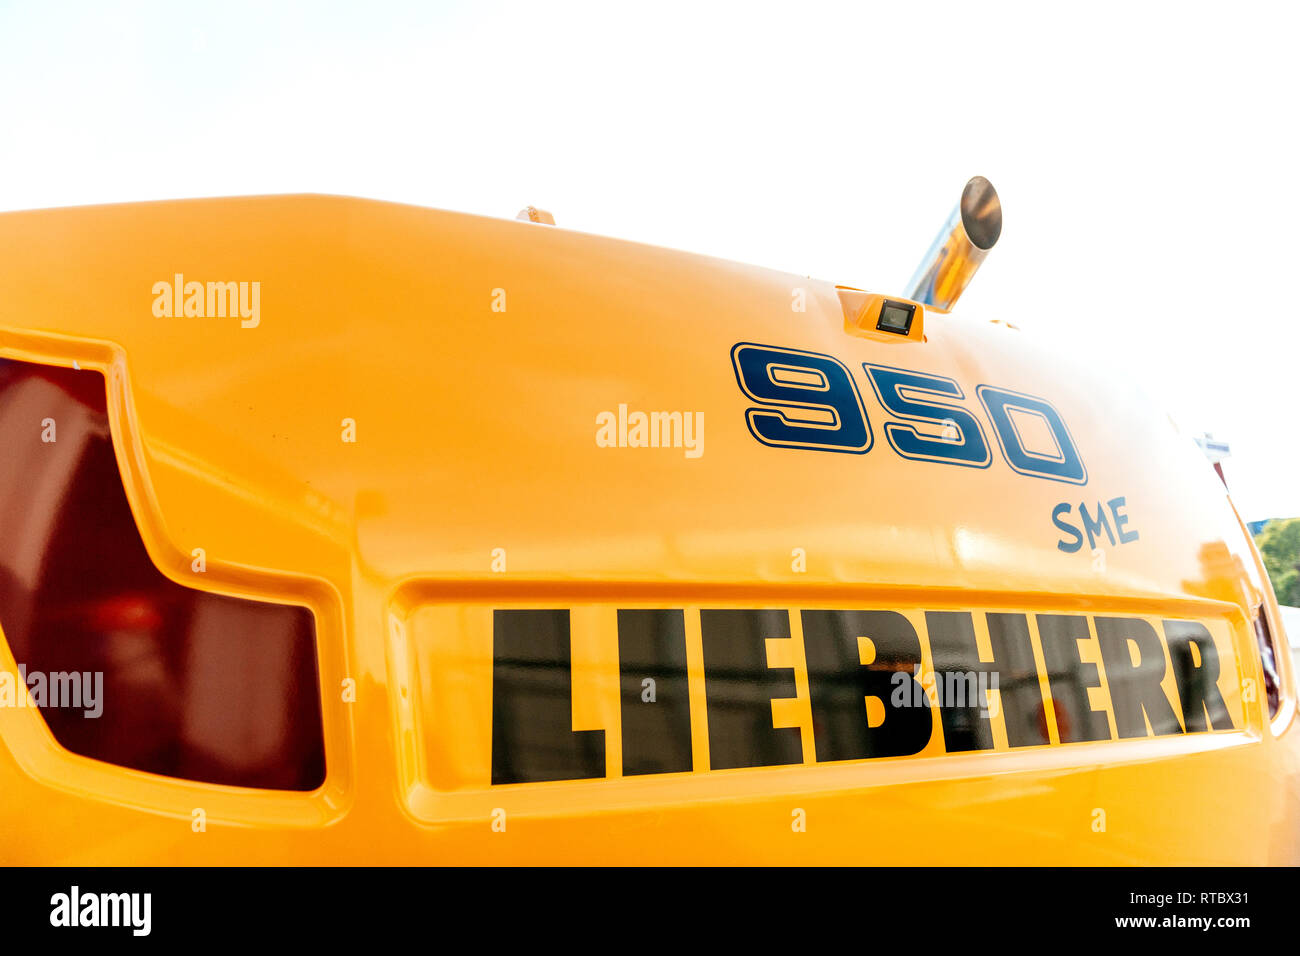 PARIS, FRANCE - SEP 5, 2019: Rear view of a Liebherr 950 sme excavator on a construction site Stock Photo